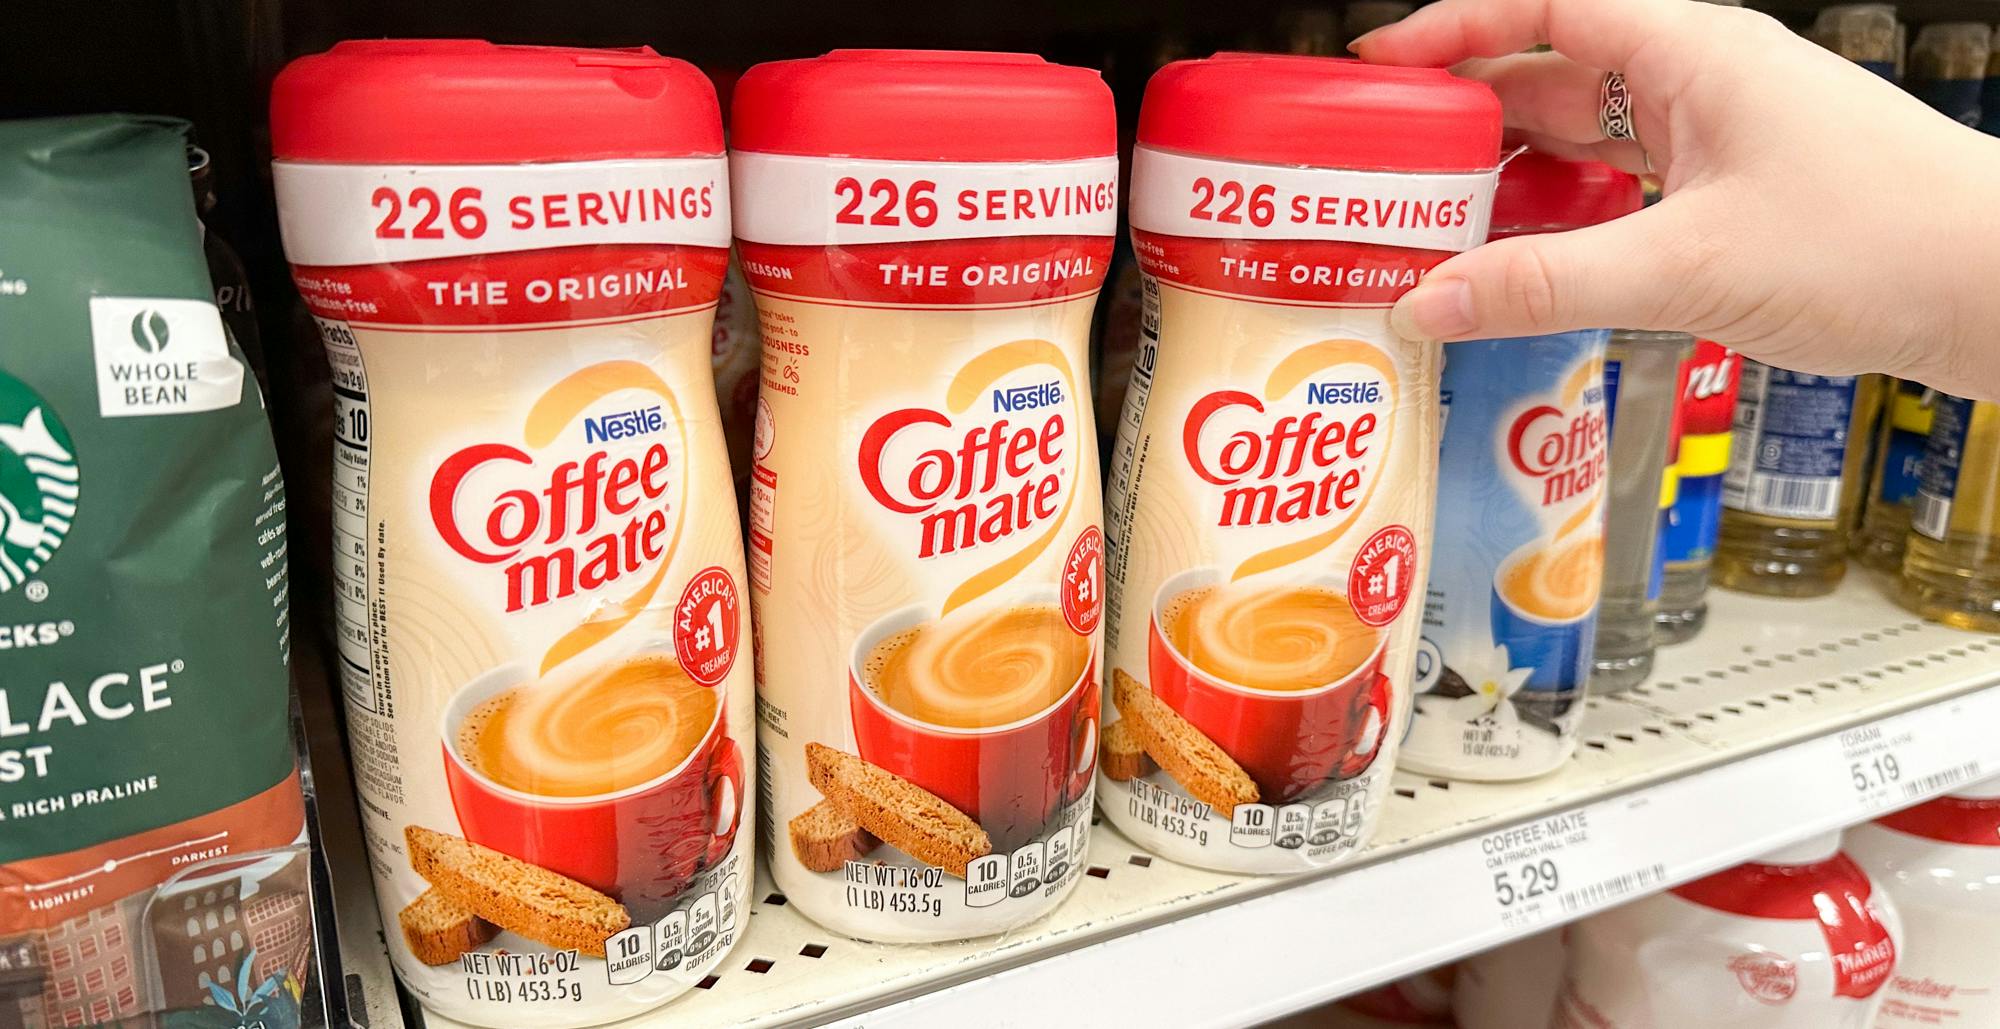 Coffee mate Settlement: Here's How to Get a Quick $5 (or More)